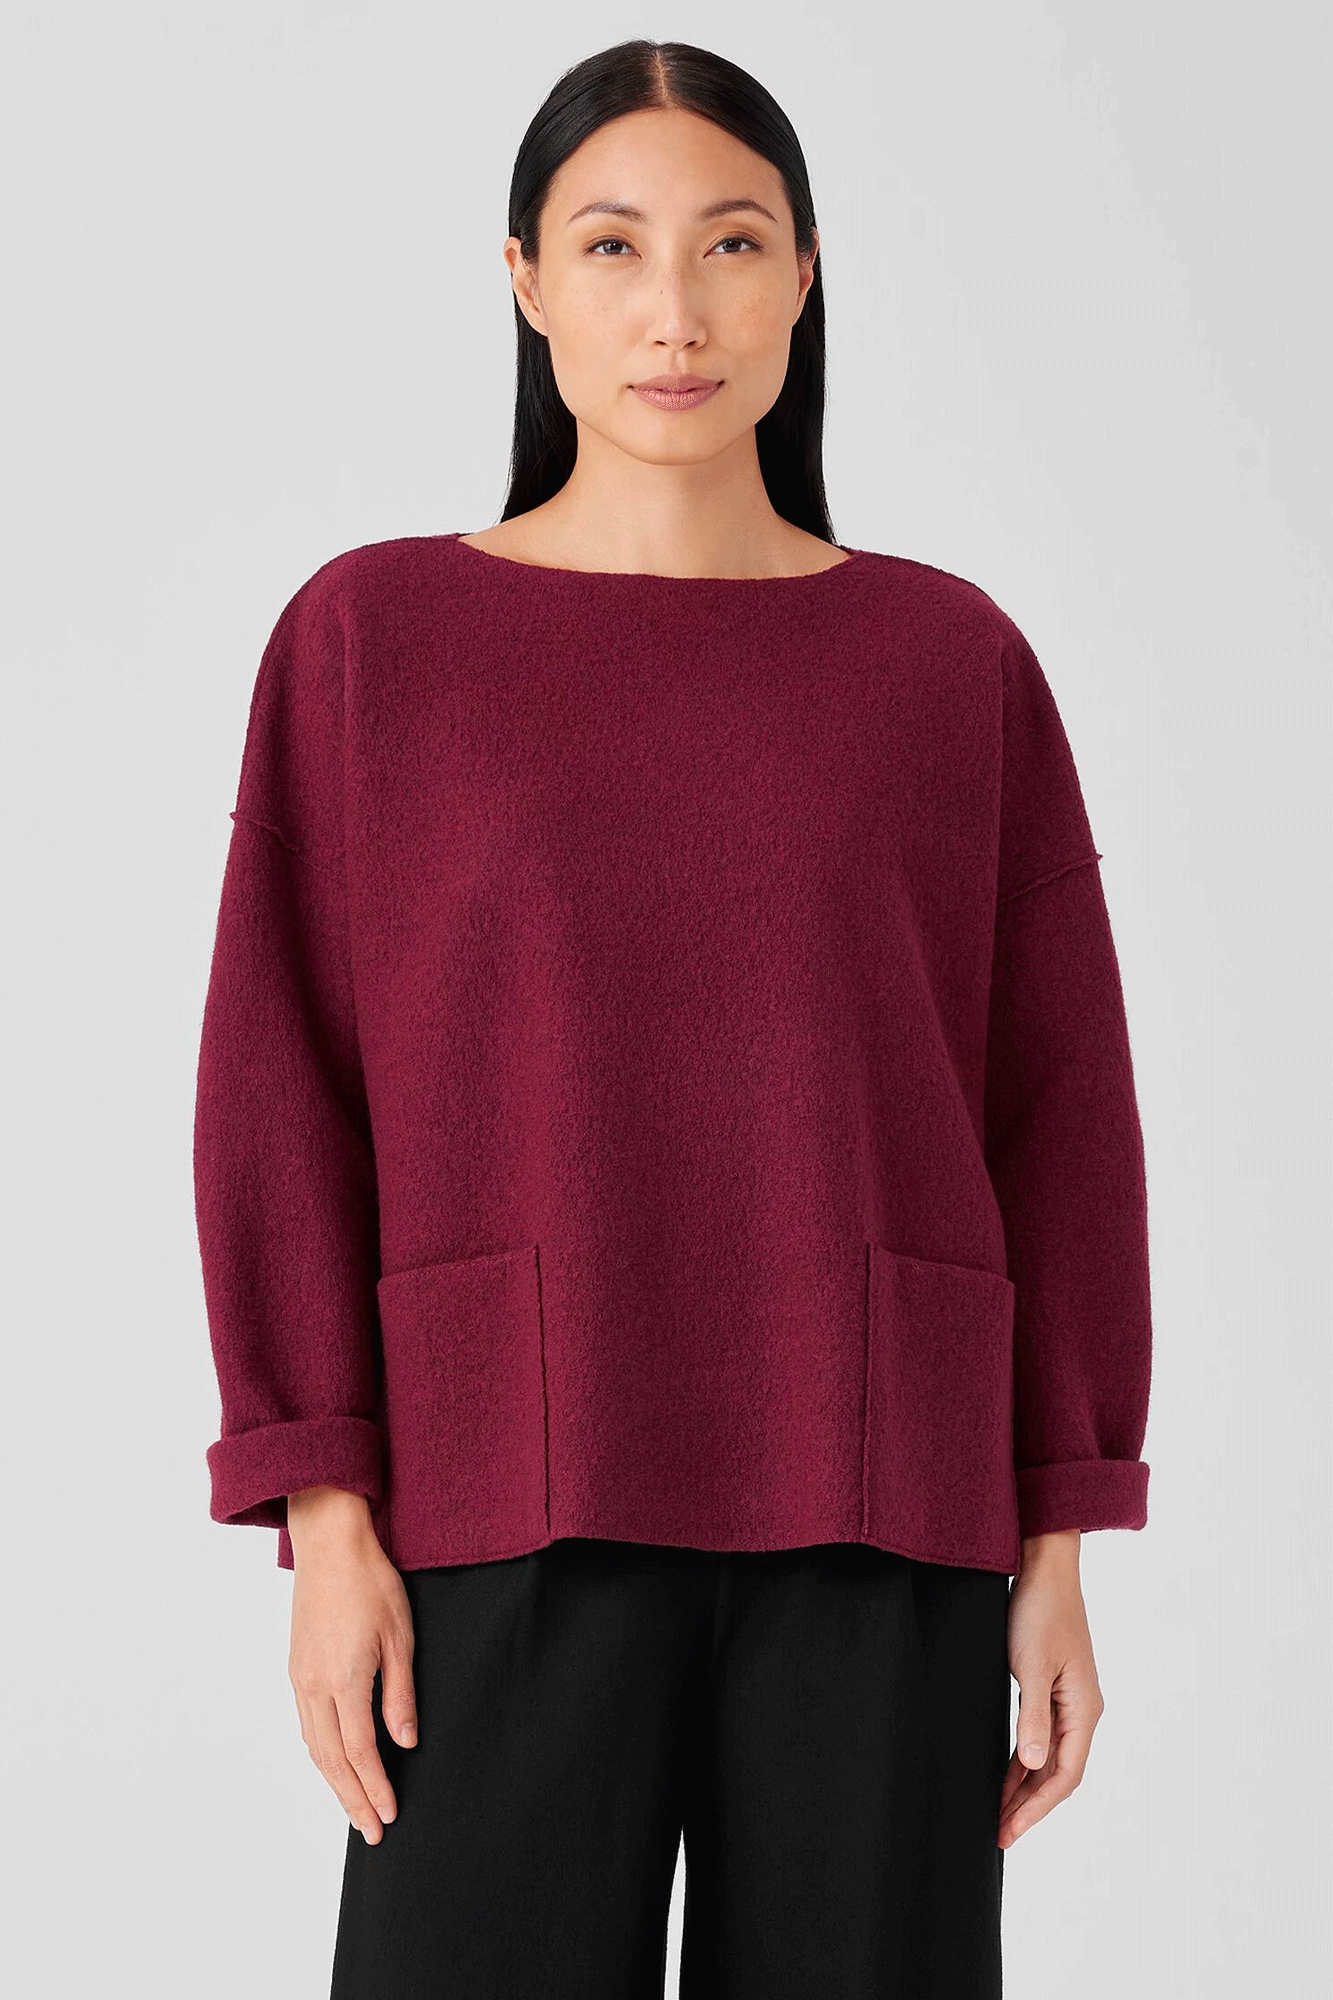 This Bateau Neck Box Top from Eileen Fisher is designed with elevated comfort in mind. Boiled wool fabric with a combination of regenerative fiber from farms that support soil health and biodiversity make this top ultra-luxurious. Enjoy the bateau neck, patch pockets, and raw edge hem for a timeless look.